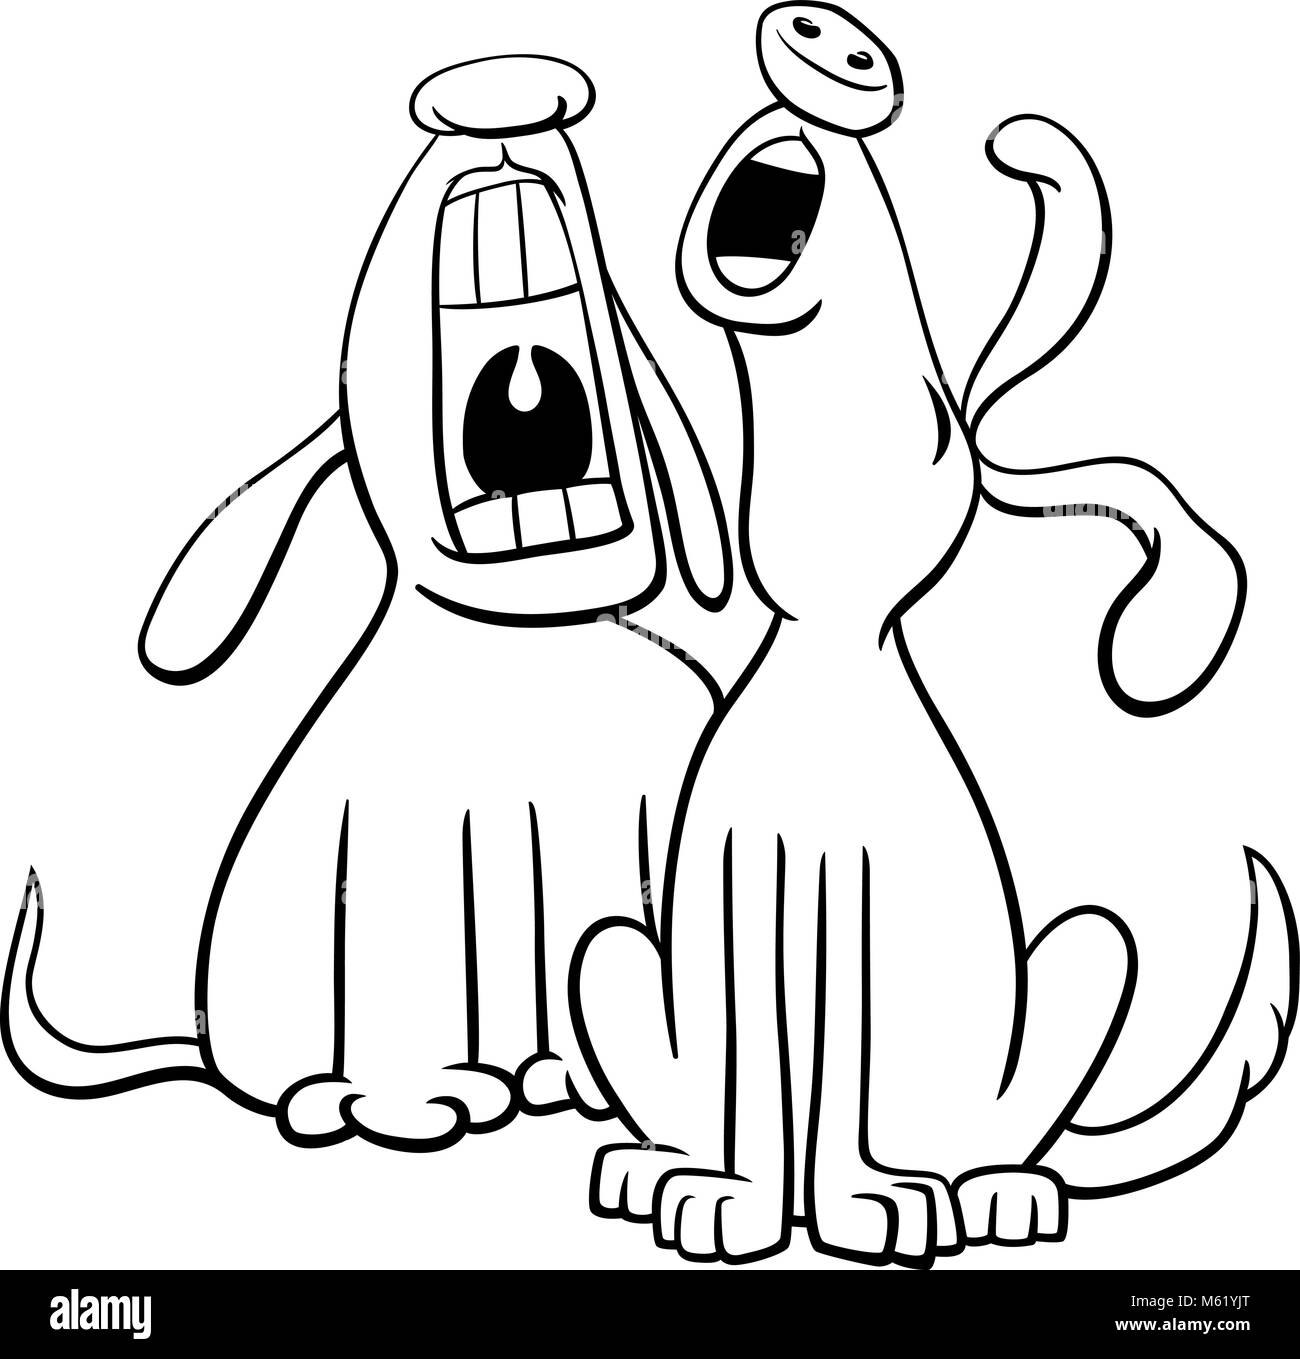 Black and White Cartoon Illustration of Two Dogs Animal Characters Barking or Howling Coloring Book Stock Vector